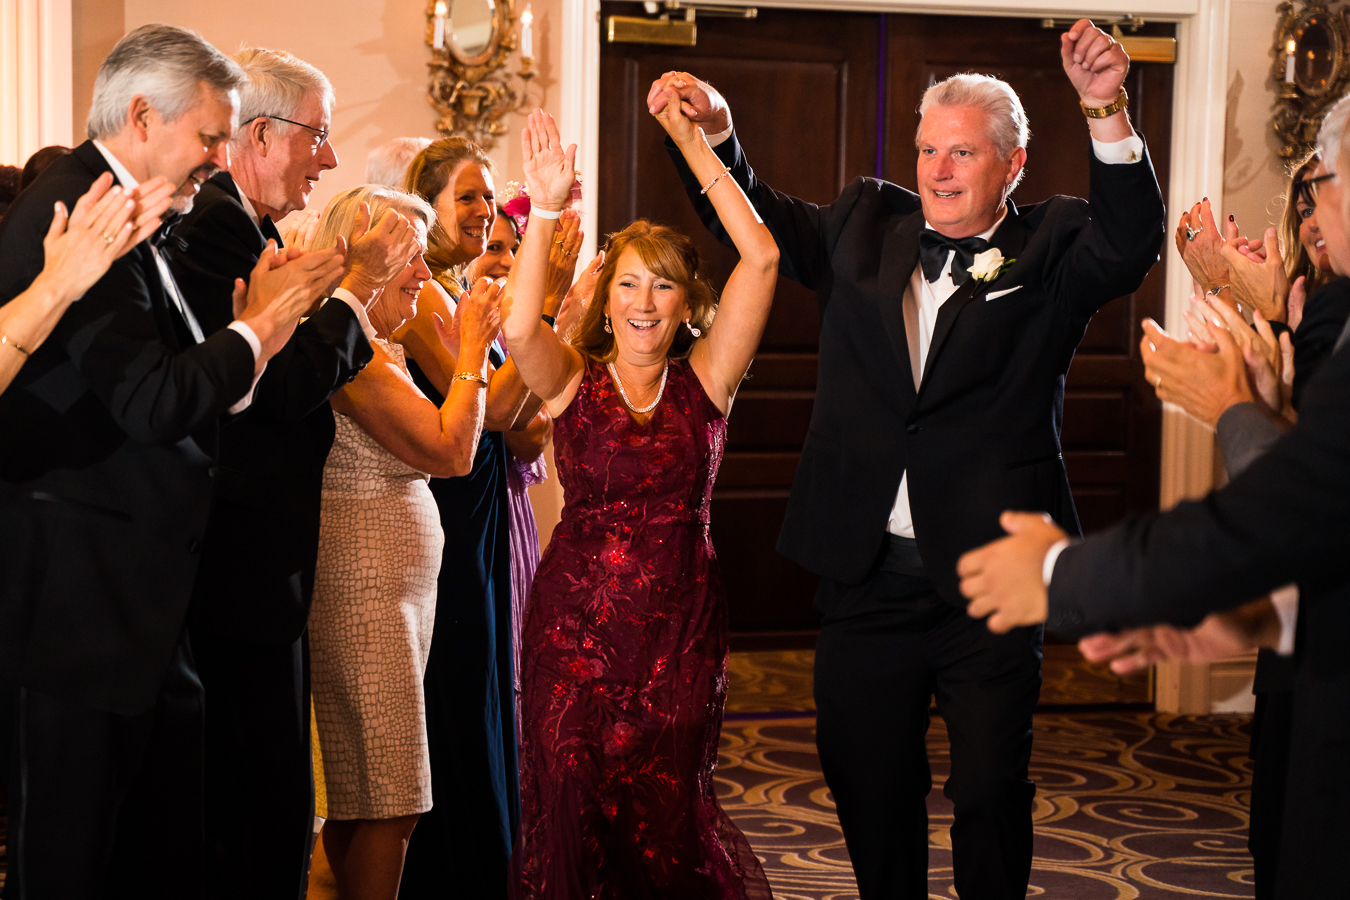 fun image of wedding guests as they clap and cheer while the parents of the groom enter this palace at somerset park wedding reception 